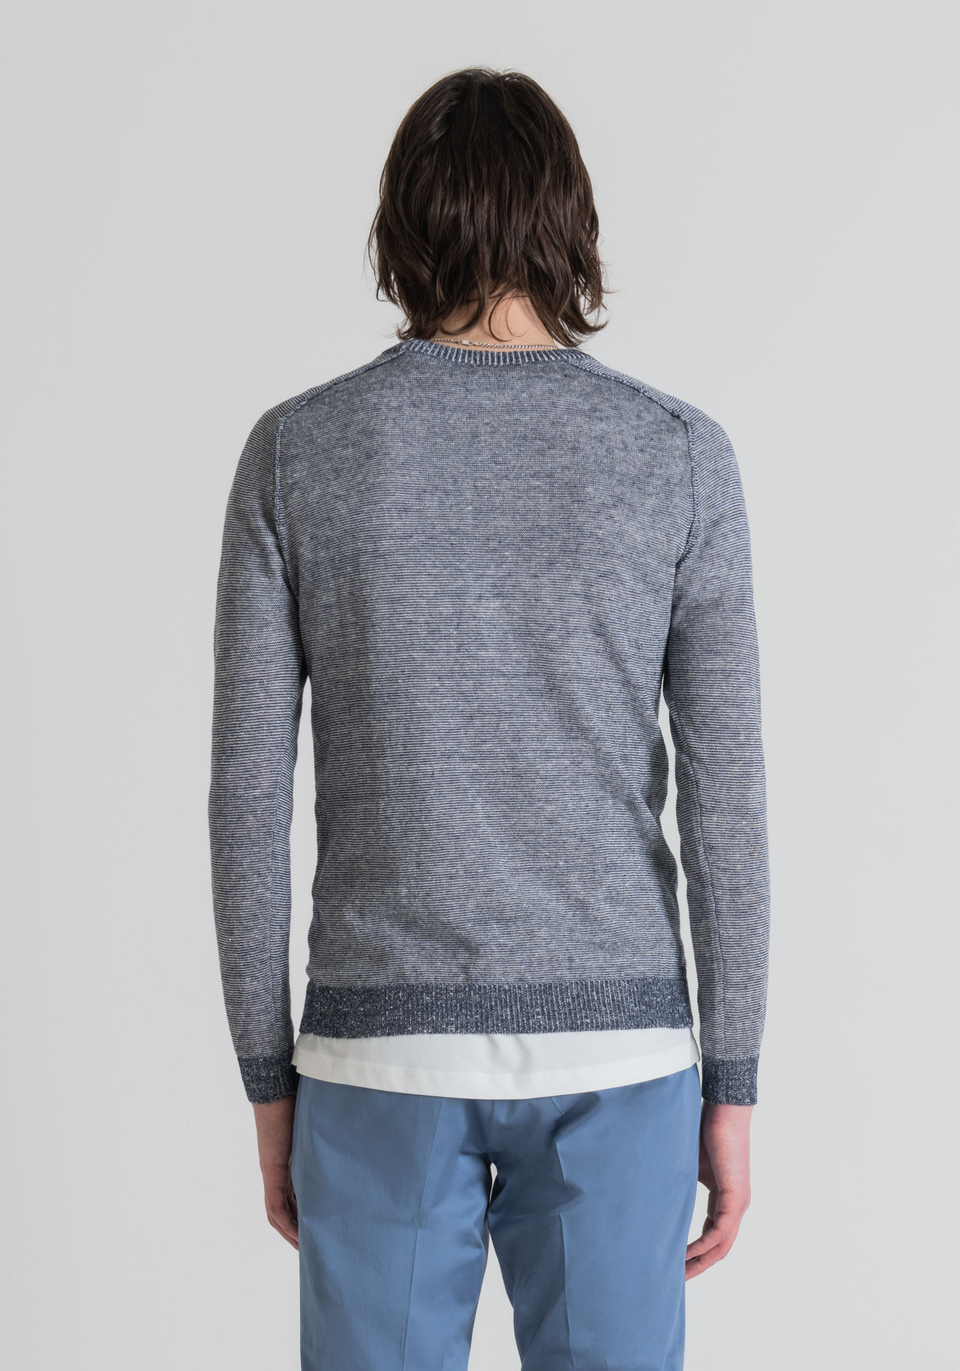 MARL-EFFECT LINEN-BLEND SWEATER WITH RAW-EDGE SEAMS - Antony Morato Online Shop